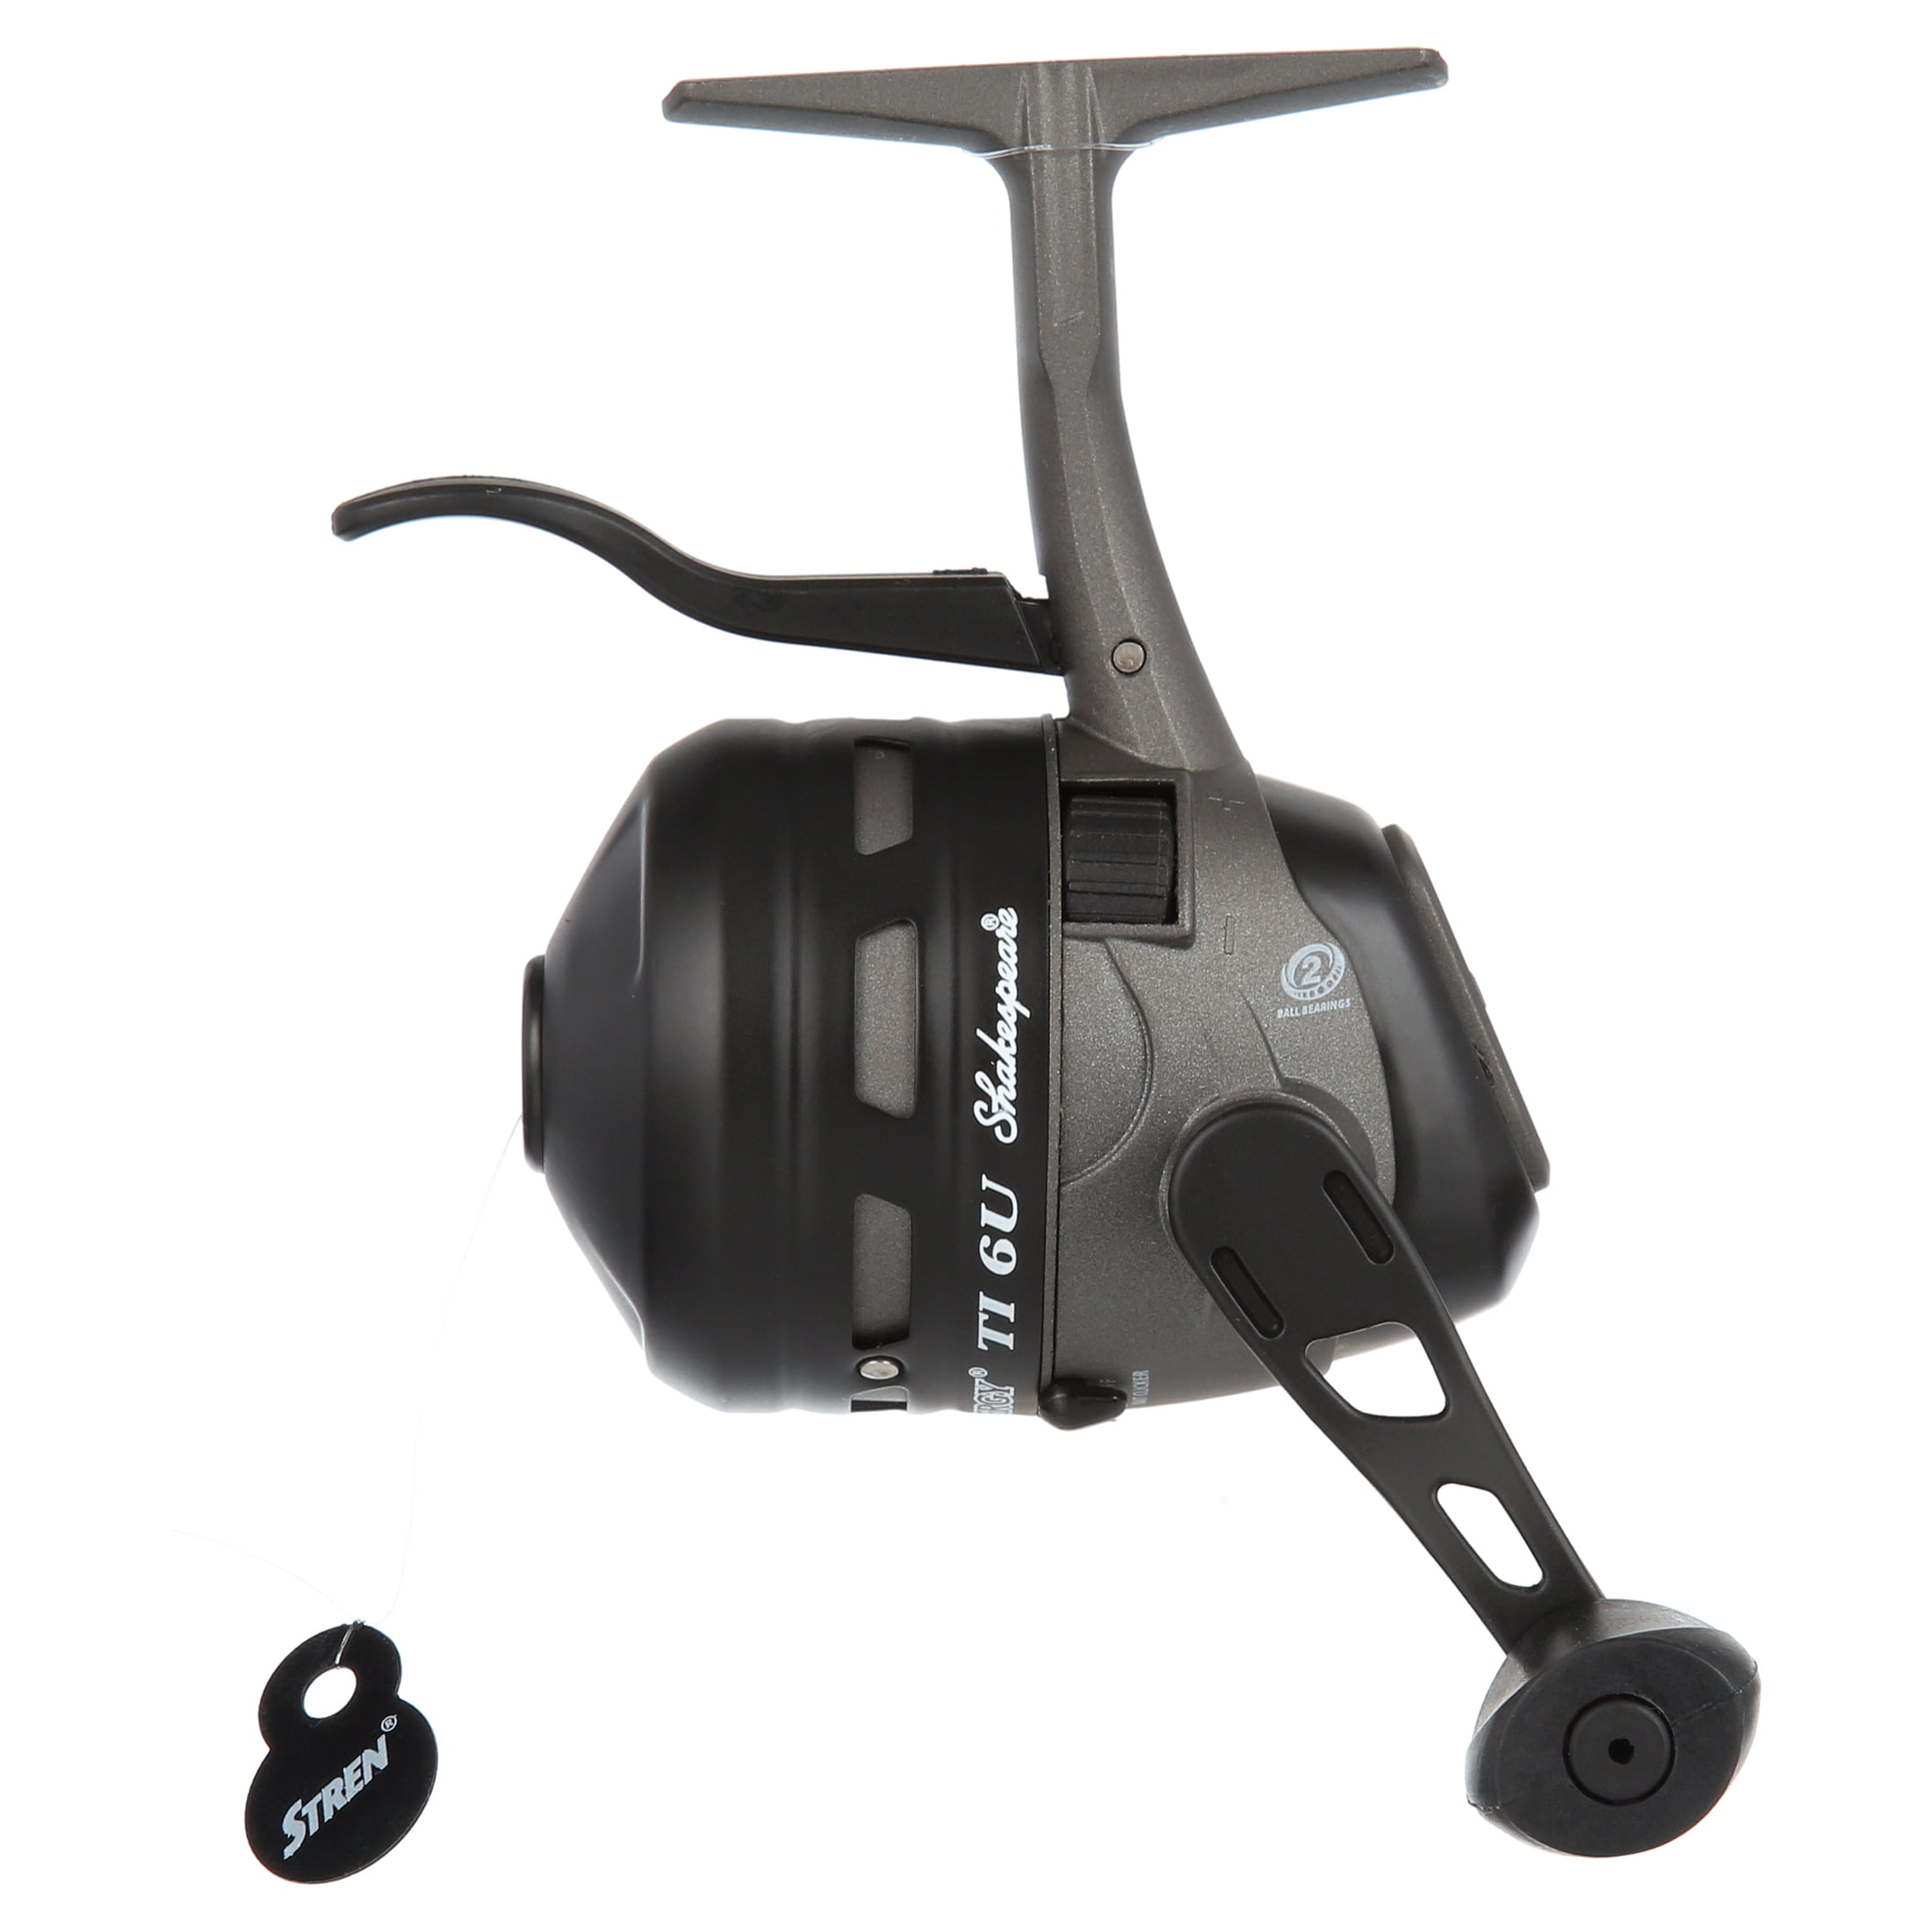 Shakespeare Synergy bait casting fishing reel of the day #reel